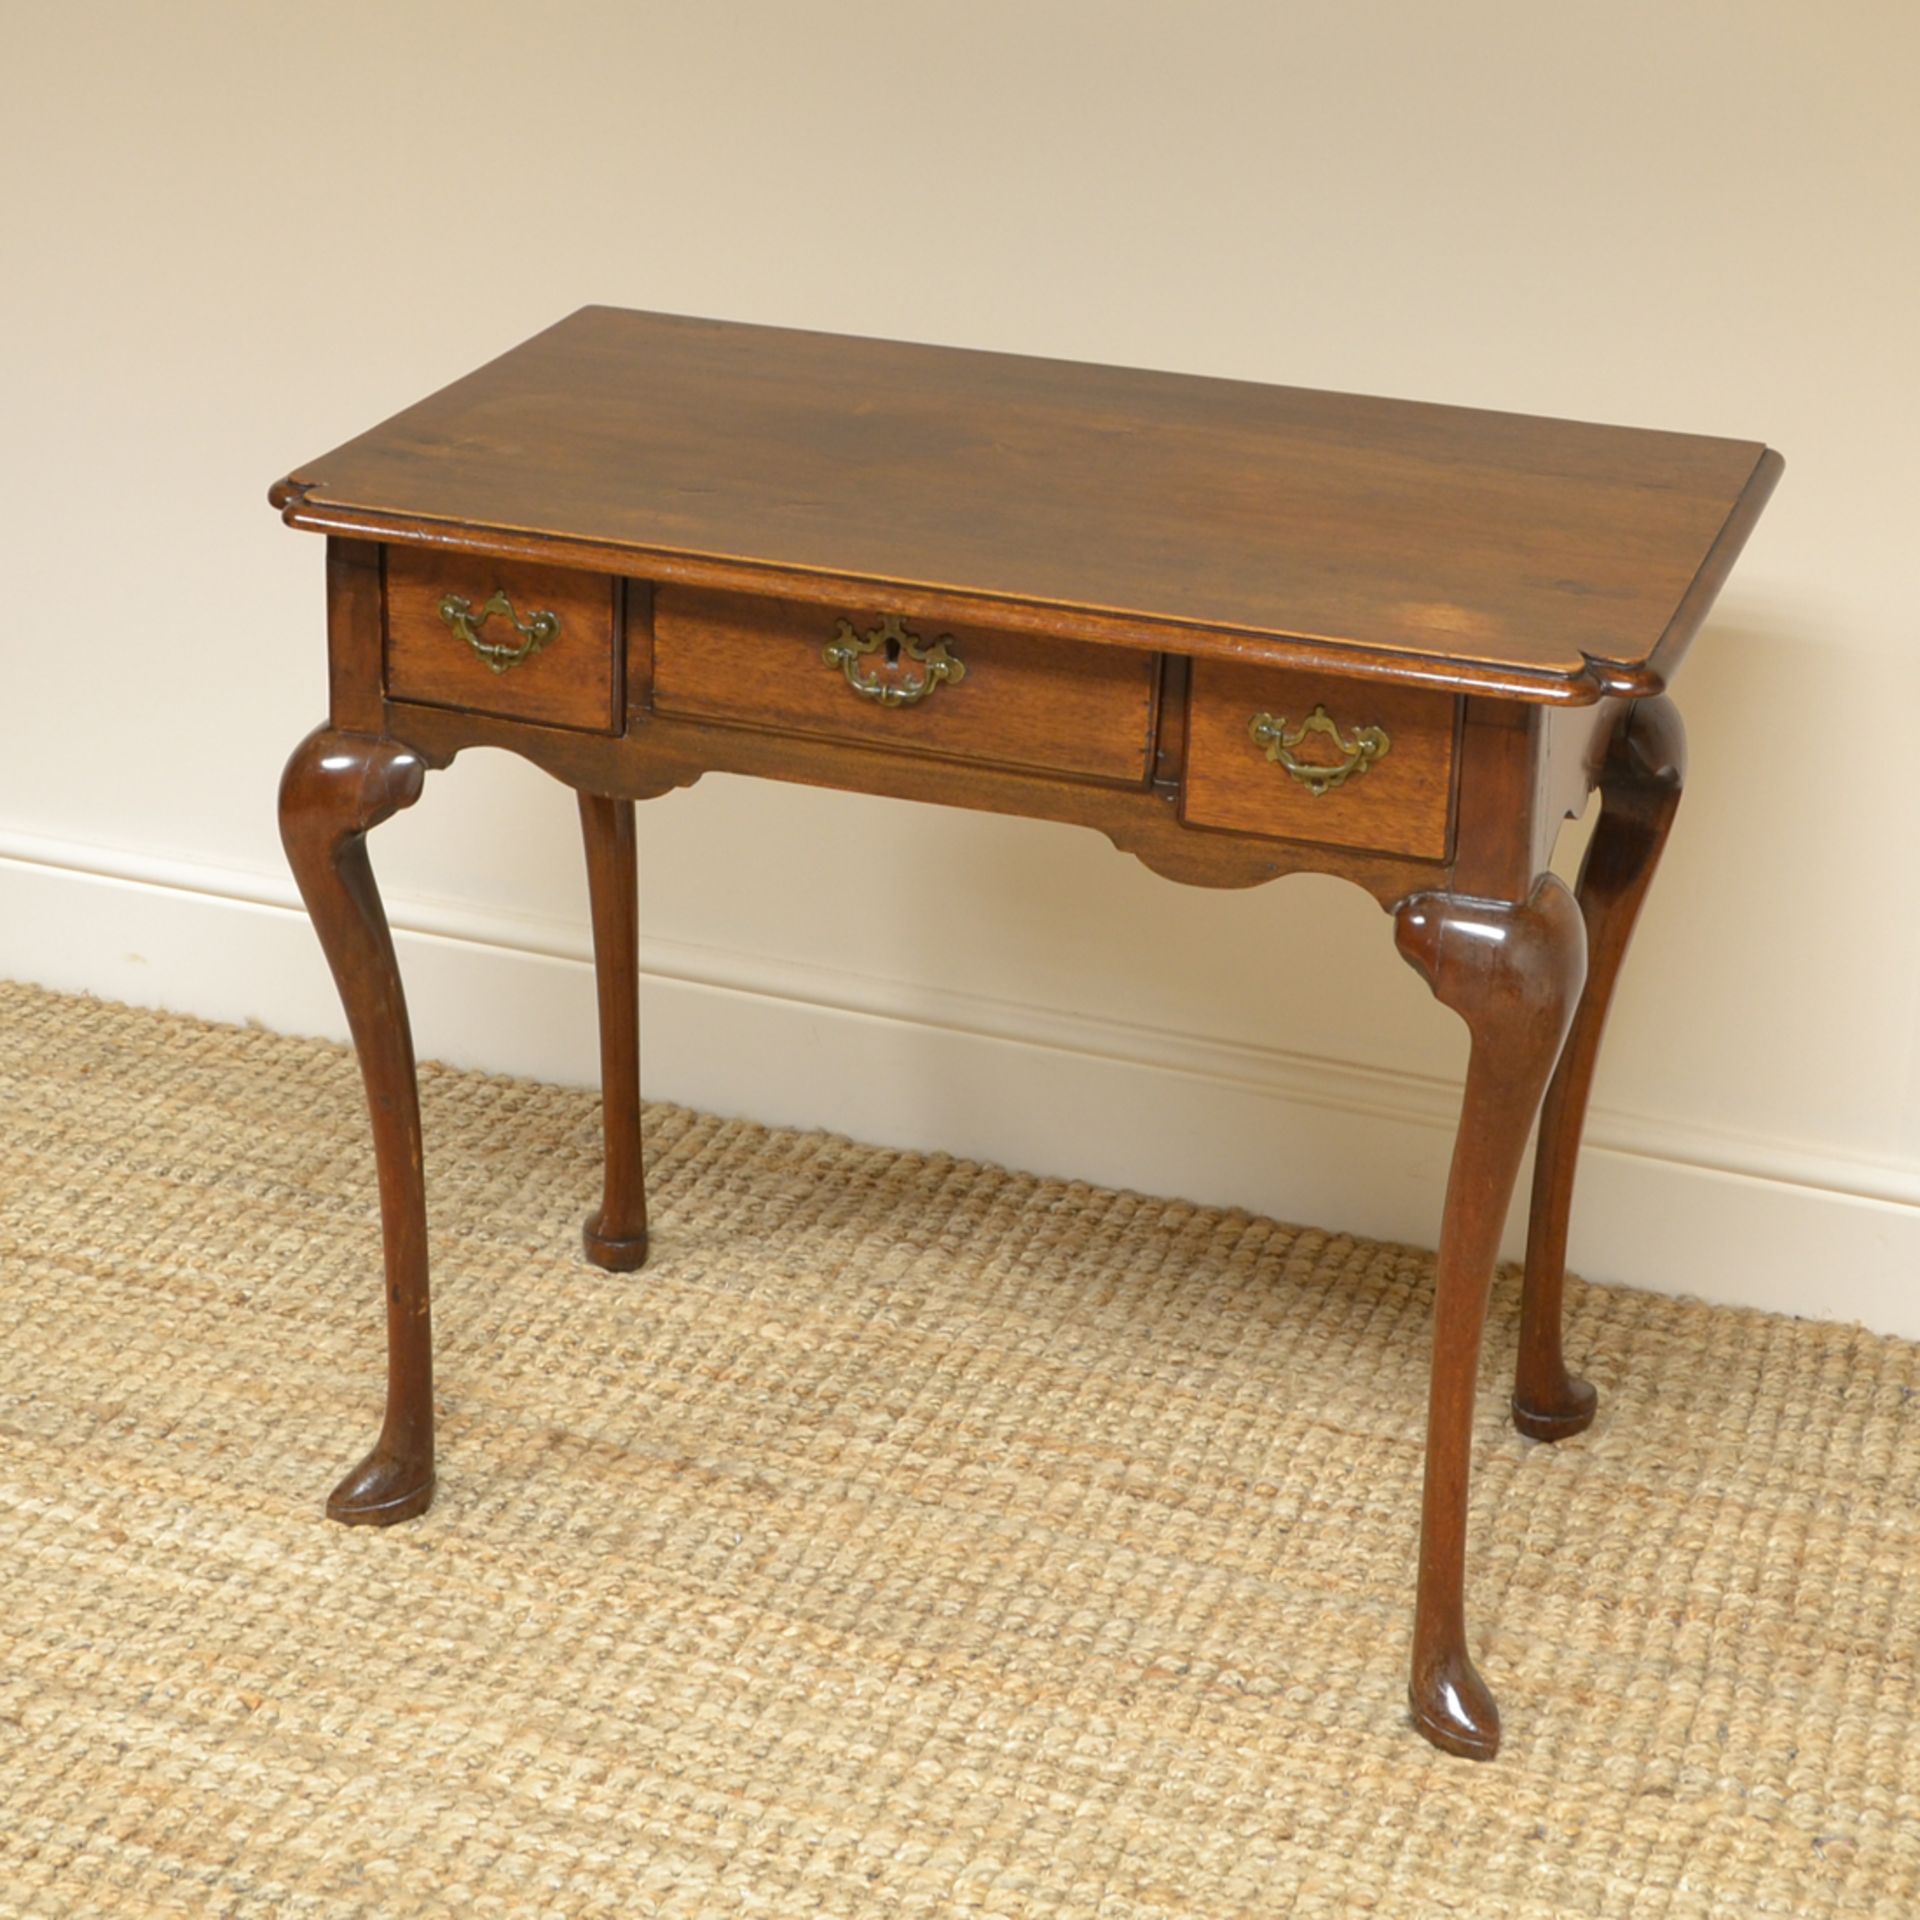 Period Country Walnut Antique Side Table / Low Boy - Image 6 of 6